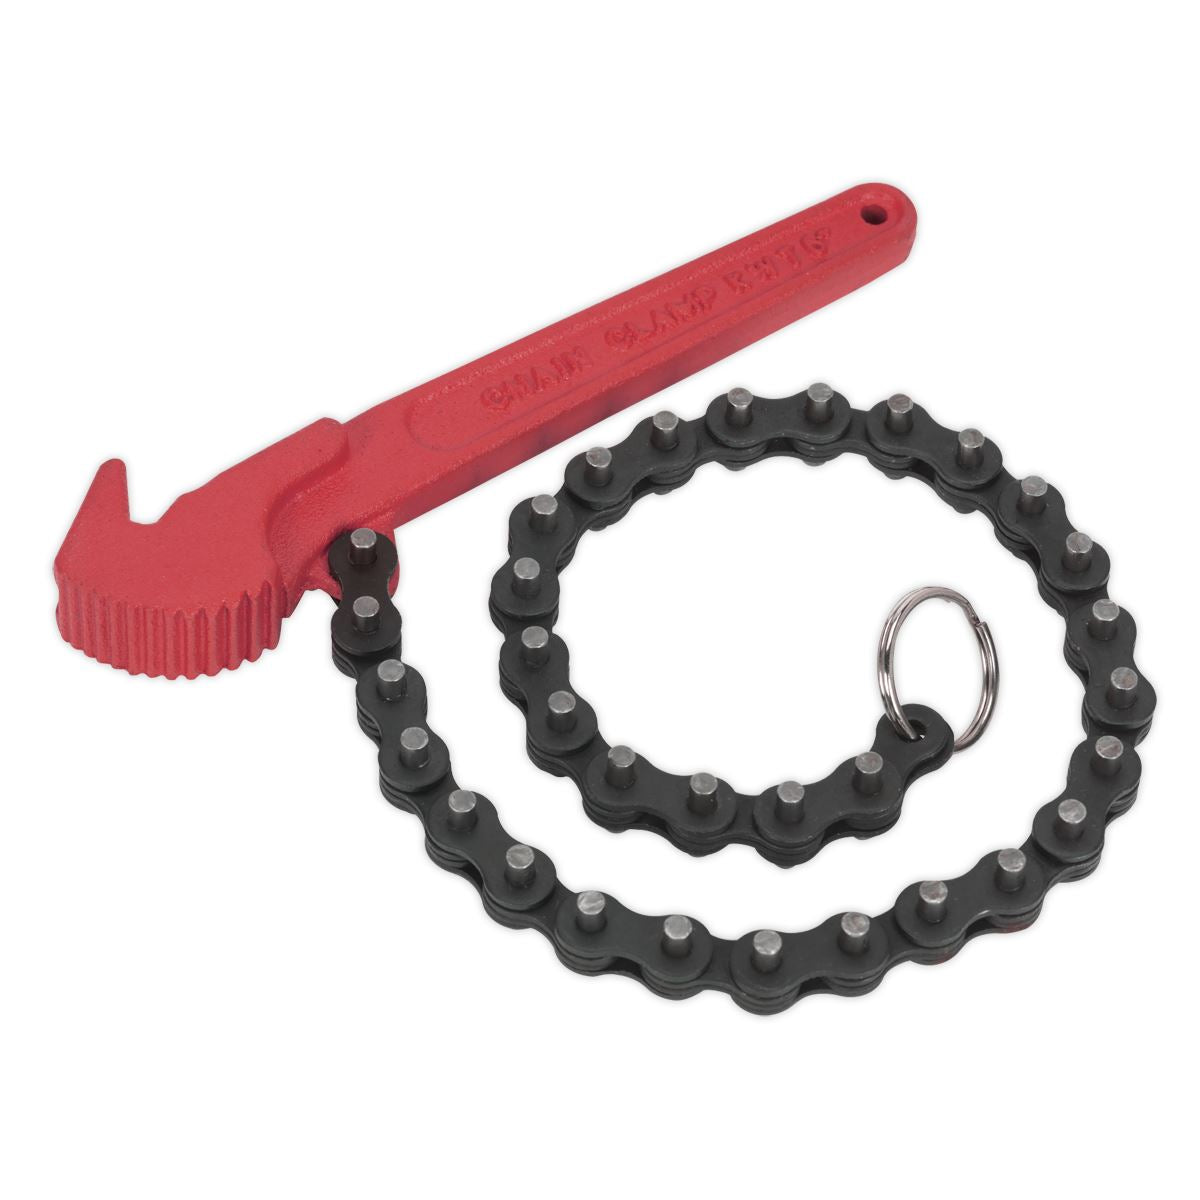 Sealey Oil Filter Chain Wrench Ø60-106mm Capacity